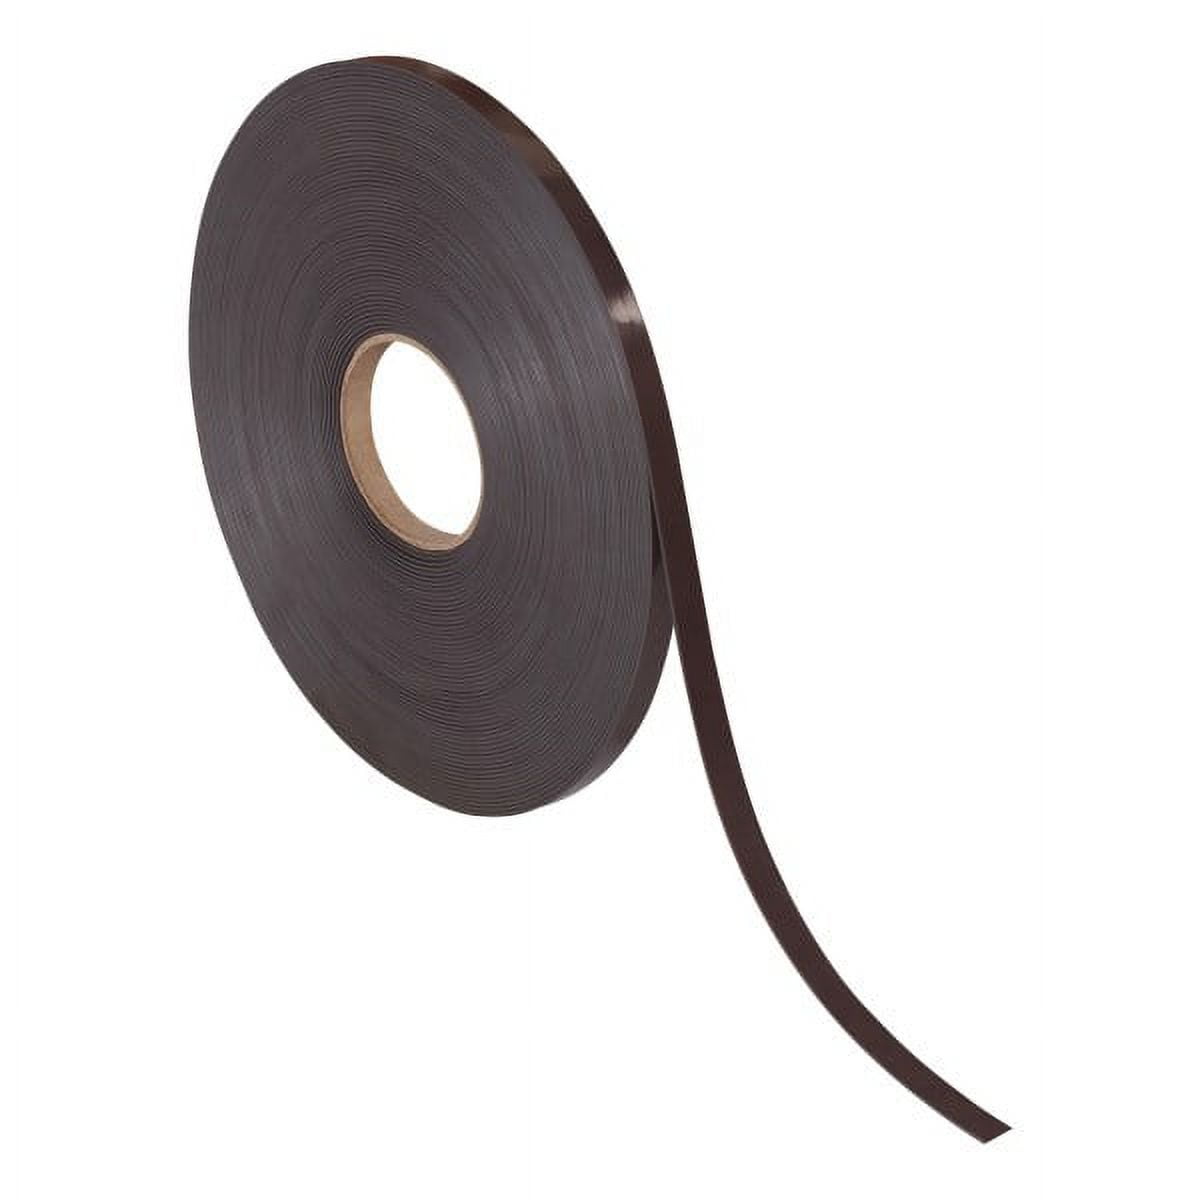 Lh132 0.5 In. X 100 Ft. Magnetic Tape